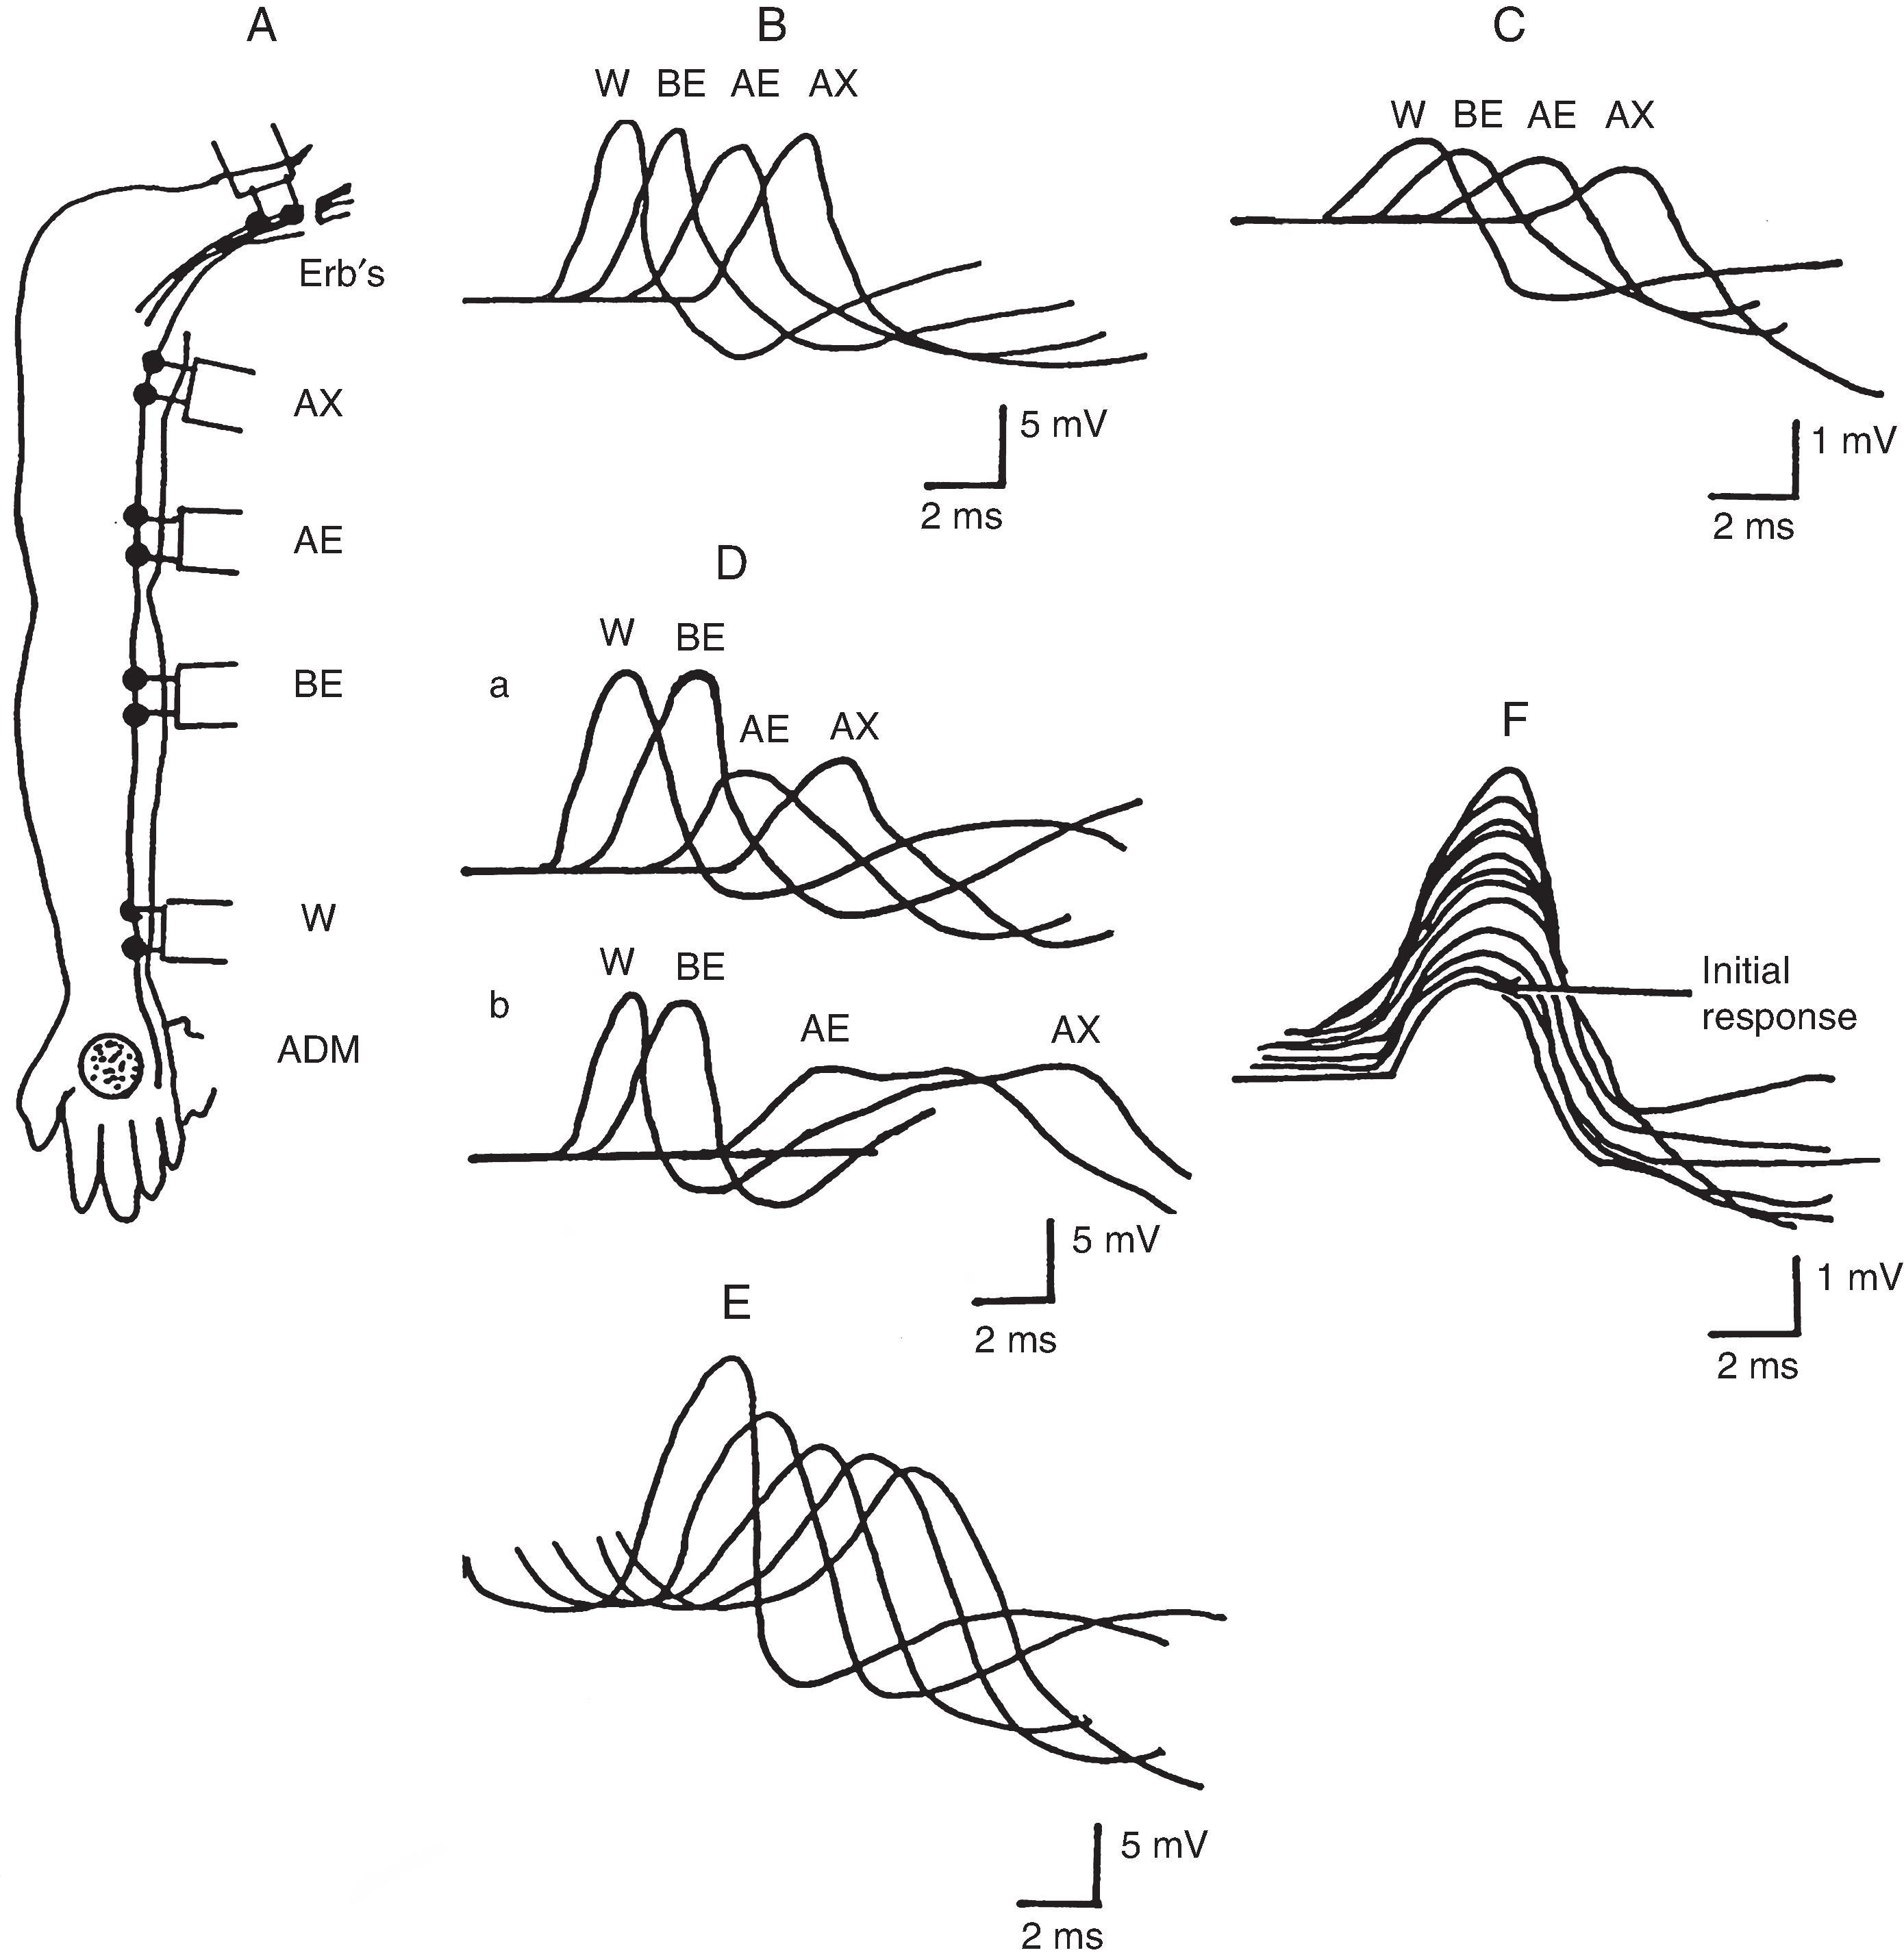 Figure 19.7, A, Commonly used site of stimulation of the ulnar nerve at the wrist, below the elbow, above the elbow, and at the axilla. The ulnar nerve can also be stimulated at Erb’s point in the supraclavicular fossa. B, Normal amplitude compound motor action potentials (CMAPs) recorded from the abductor digiti minimi manus following stimulation of the ulnar nerve at these various sites. C, Low amplitude CMAPs in a patient with axonal neuropathy. All CMAPs are of the same amplitude but are much smaller than normal. D, Decremental response (a) and decremental and dispersed response (b) on stimulation above the elbow and at the axilla and normal response on stimulation below the elbow and wrist. E, Repetitive nerve stimulation of the ulnar nerve at the wrist in a patient with myasthenia gravis. Note the initial normal response and subsequent decremental response at the slow rate (3 pulses/s). F, Repetitive nerve stimulation in Lambert-Eaton syndrome. With a rapid rate (20–50 pulses/s), a marked incremental response occurs. Note the very low initial response and the two-fold to four-fold increase following the rapid rate of stimulation. AE , Above the elbow; AX , axilla; BE , below the elbow; W , wrist.